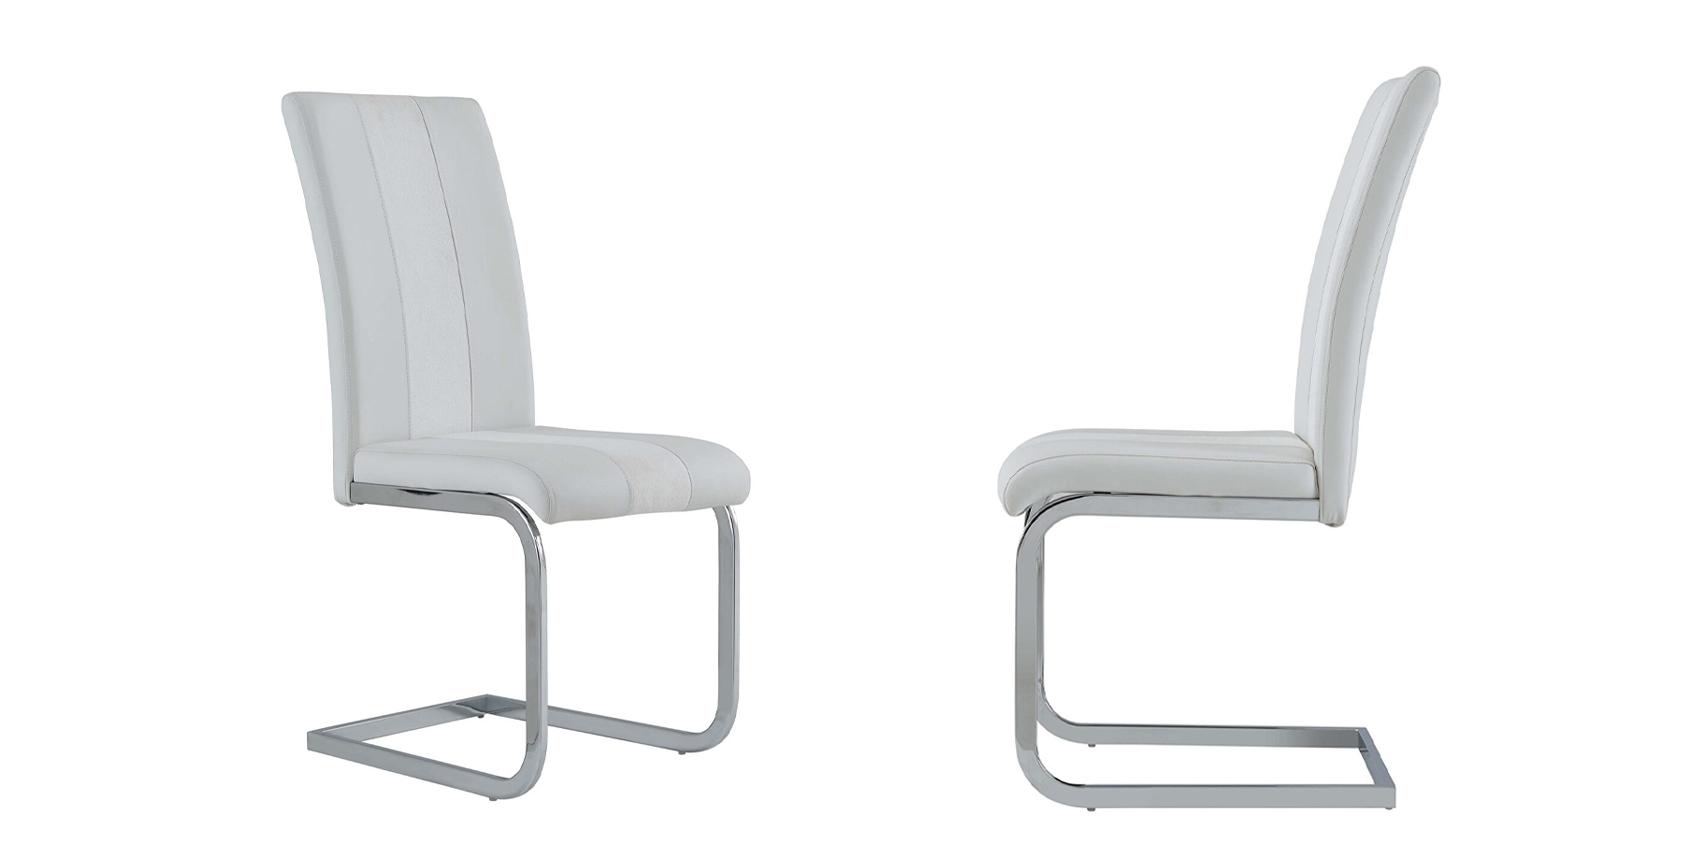 

    
D915DC-WHT White Faux Leather & Fabric Dining Chair Set 2Pcs Global USA
